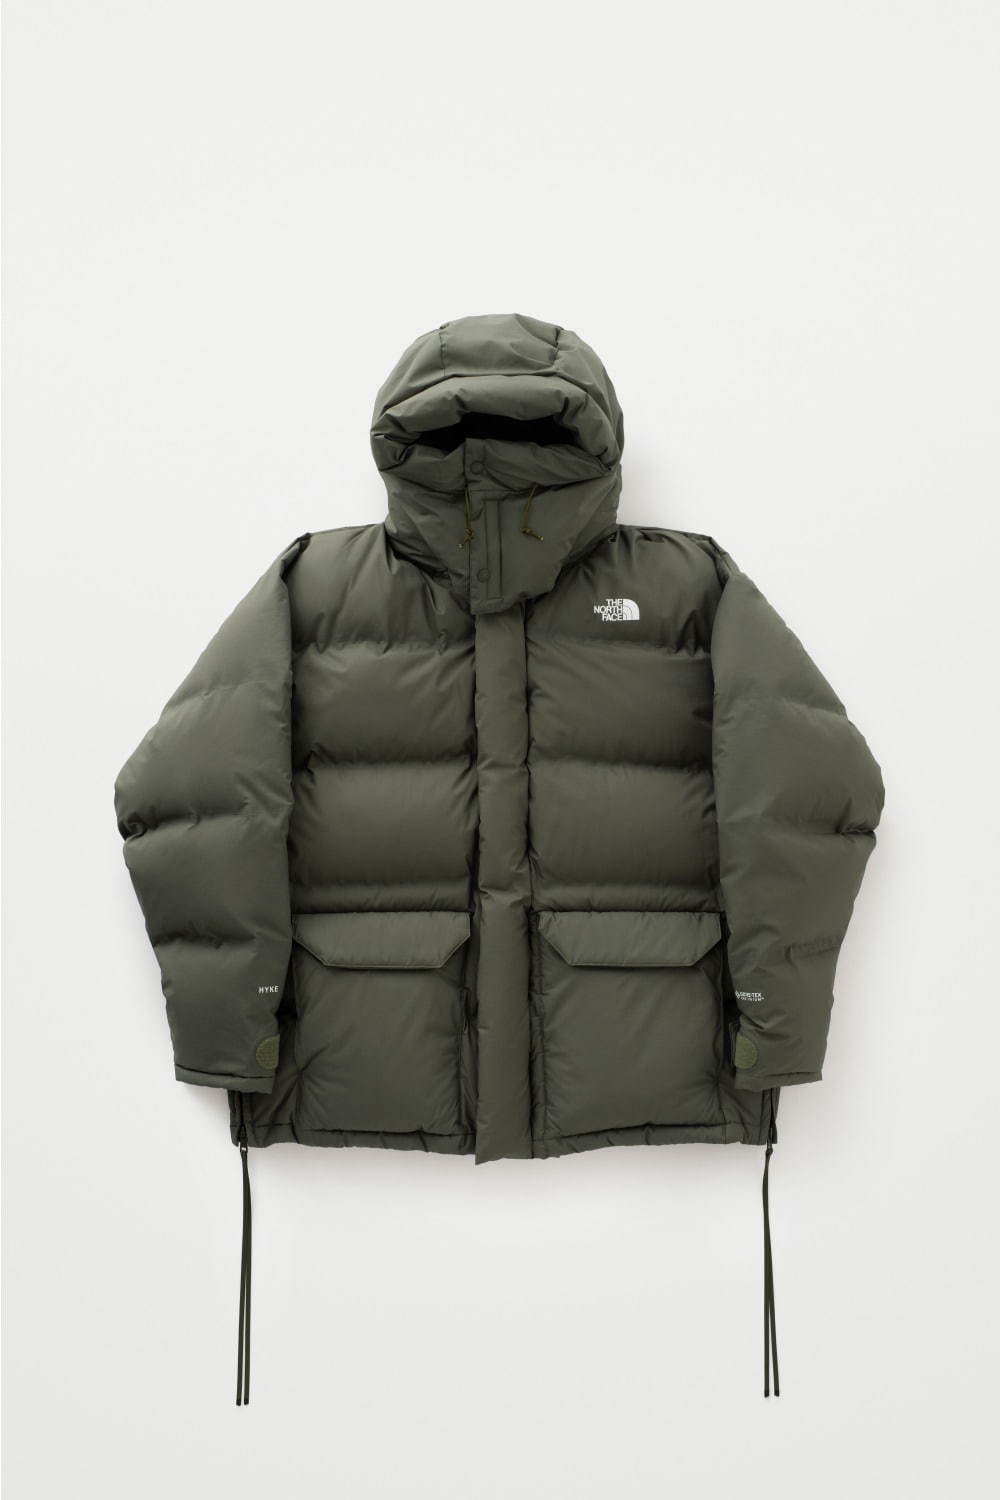 THE NORTH FACE×HYKE 23,0